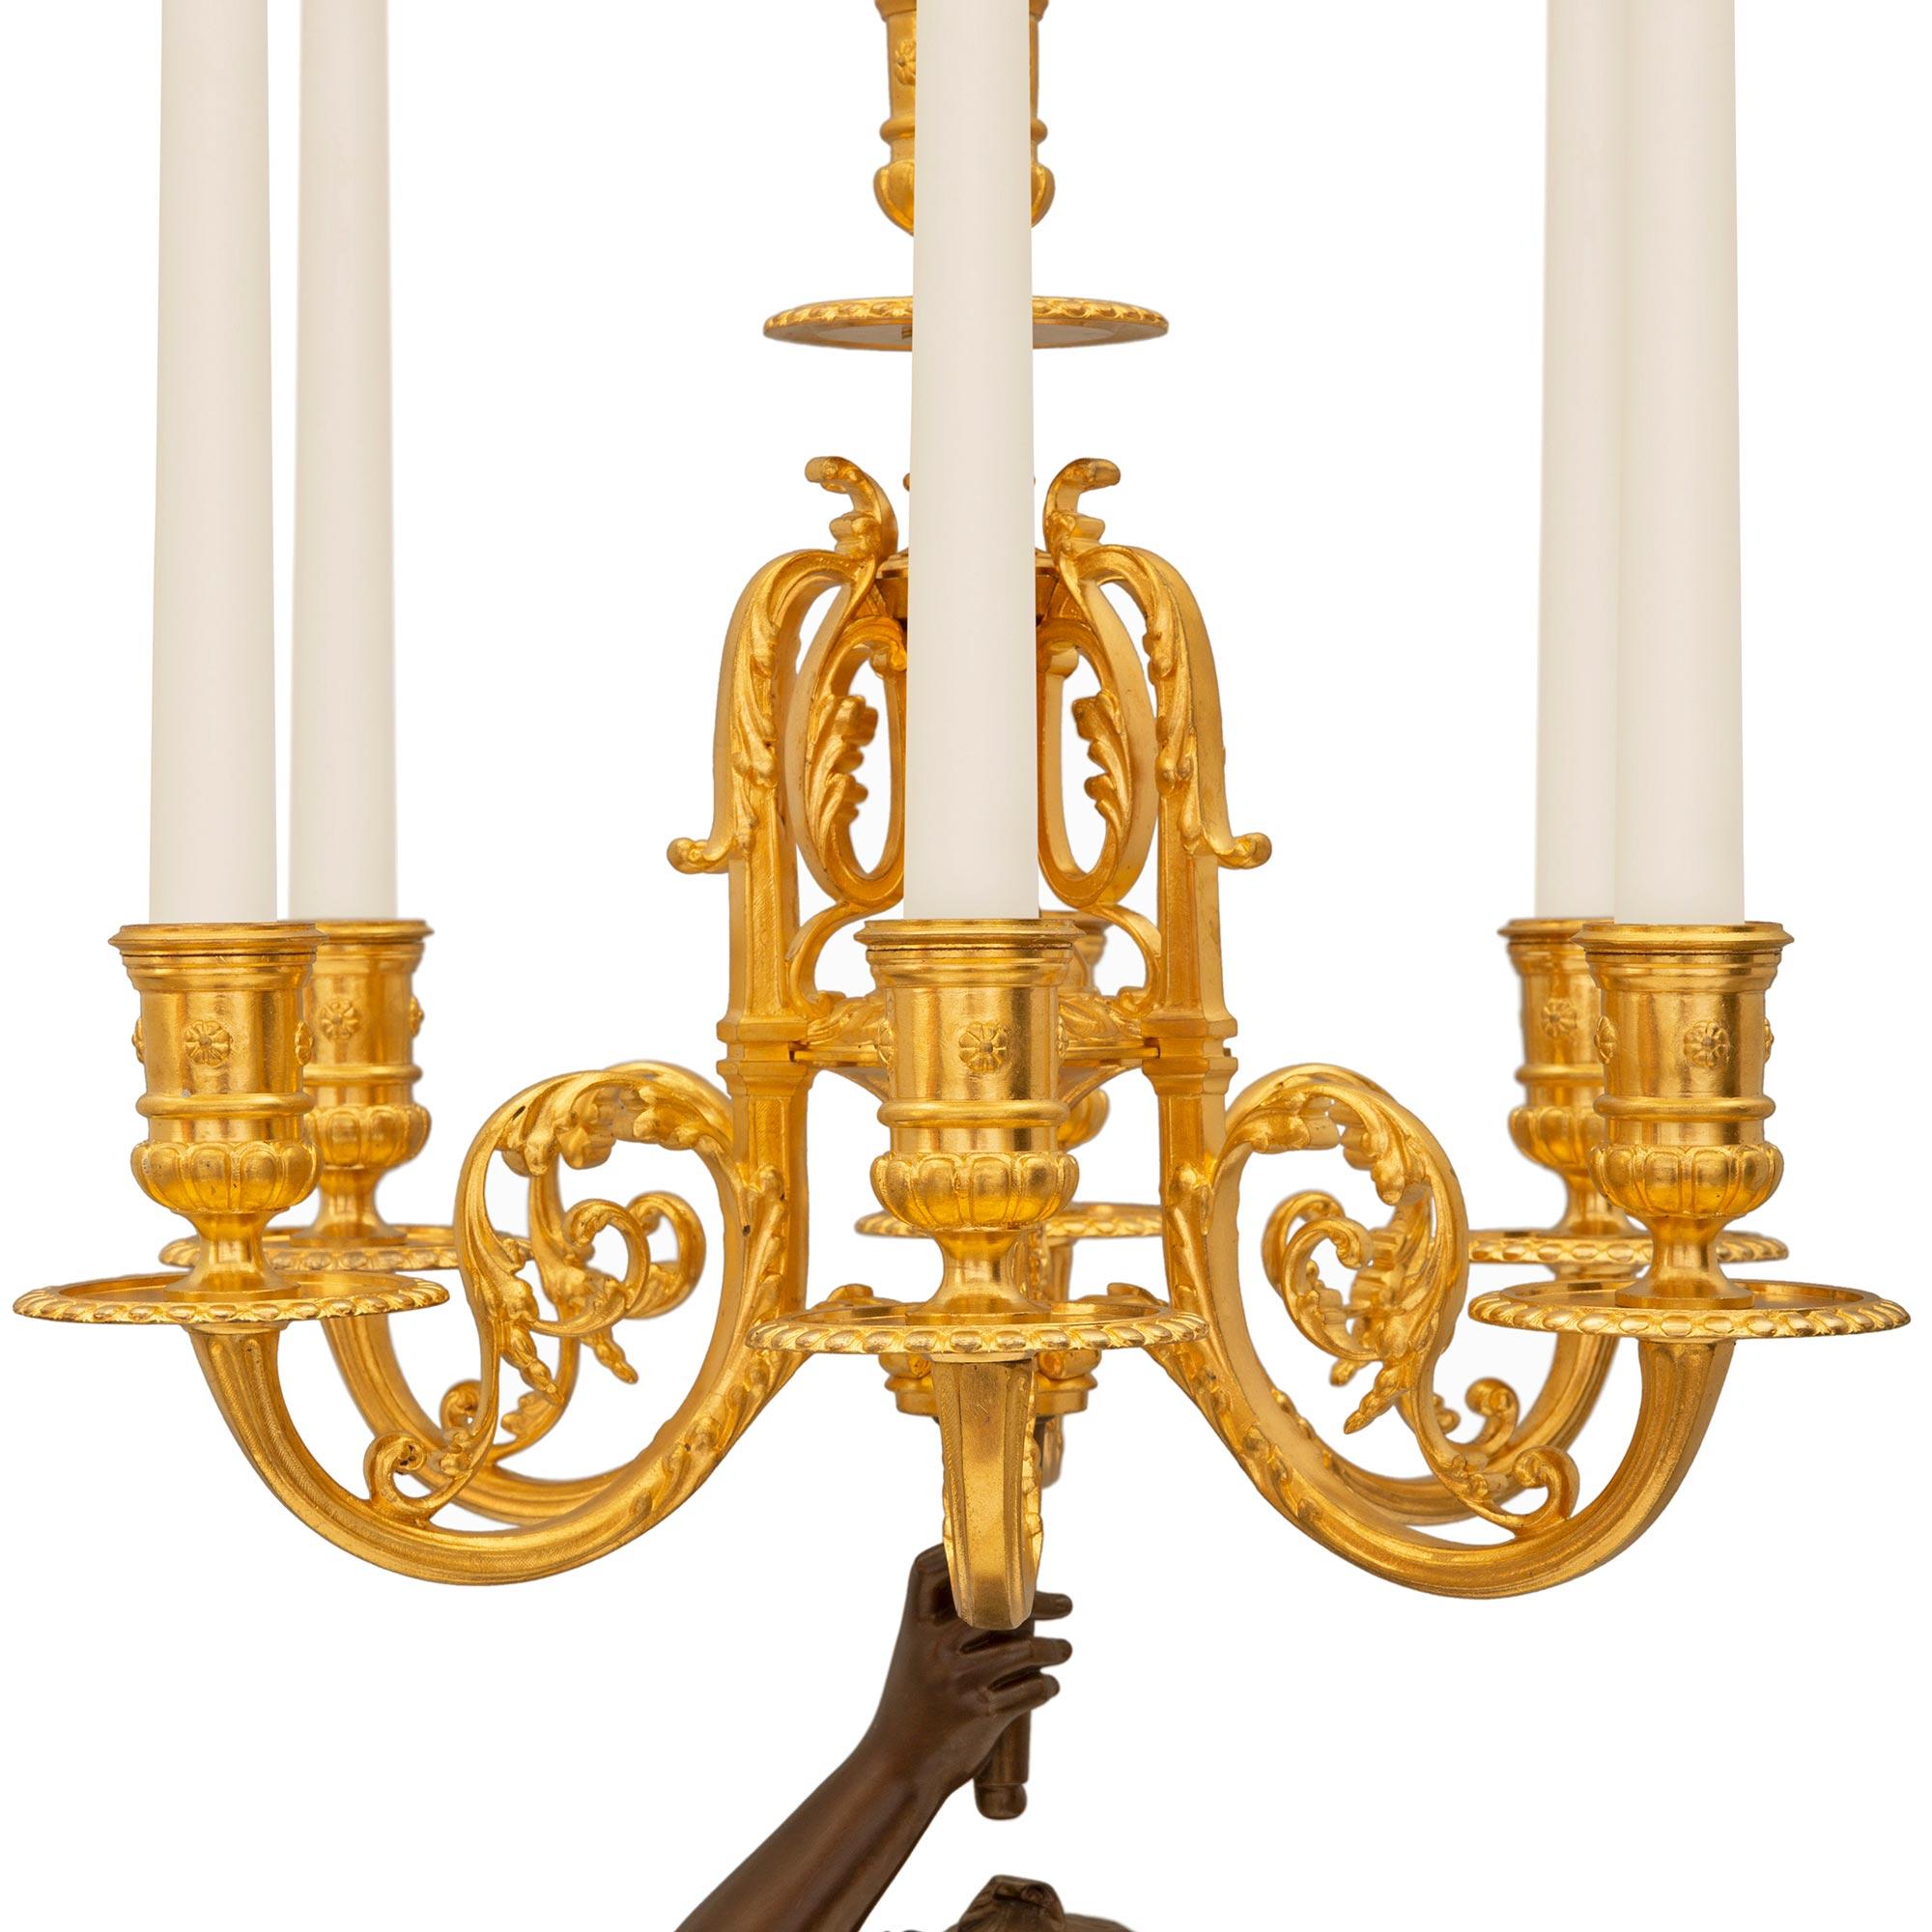 Pair of French 19th Century Renaissance St. Bronze, Ormolu, & Marble Candelbras For Sale 1